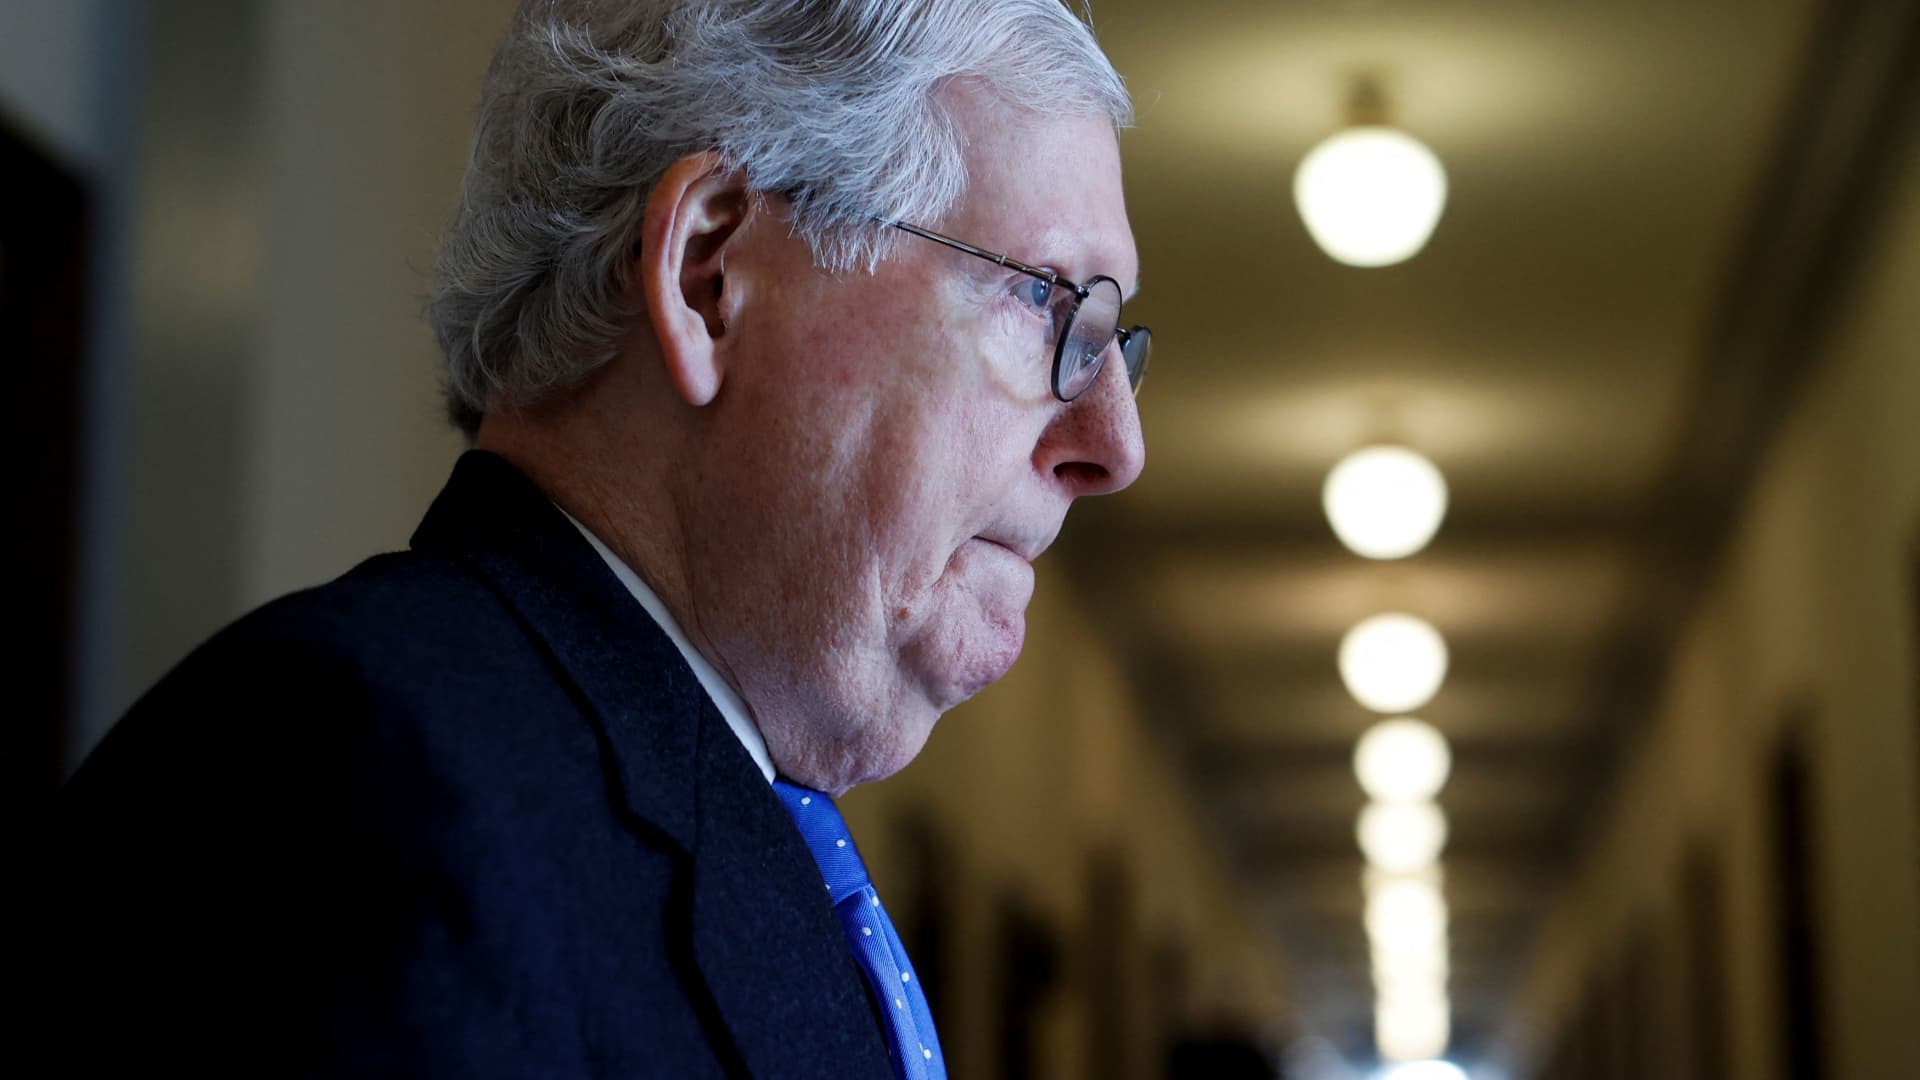 U.S. Senate Minority Leader Mitch McConnell (R-KY) departs after a Senate Republican caucus luncheon on Capitol Hill in Washington, January 12, 2022.